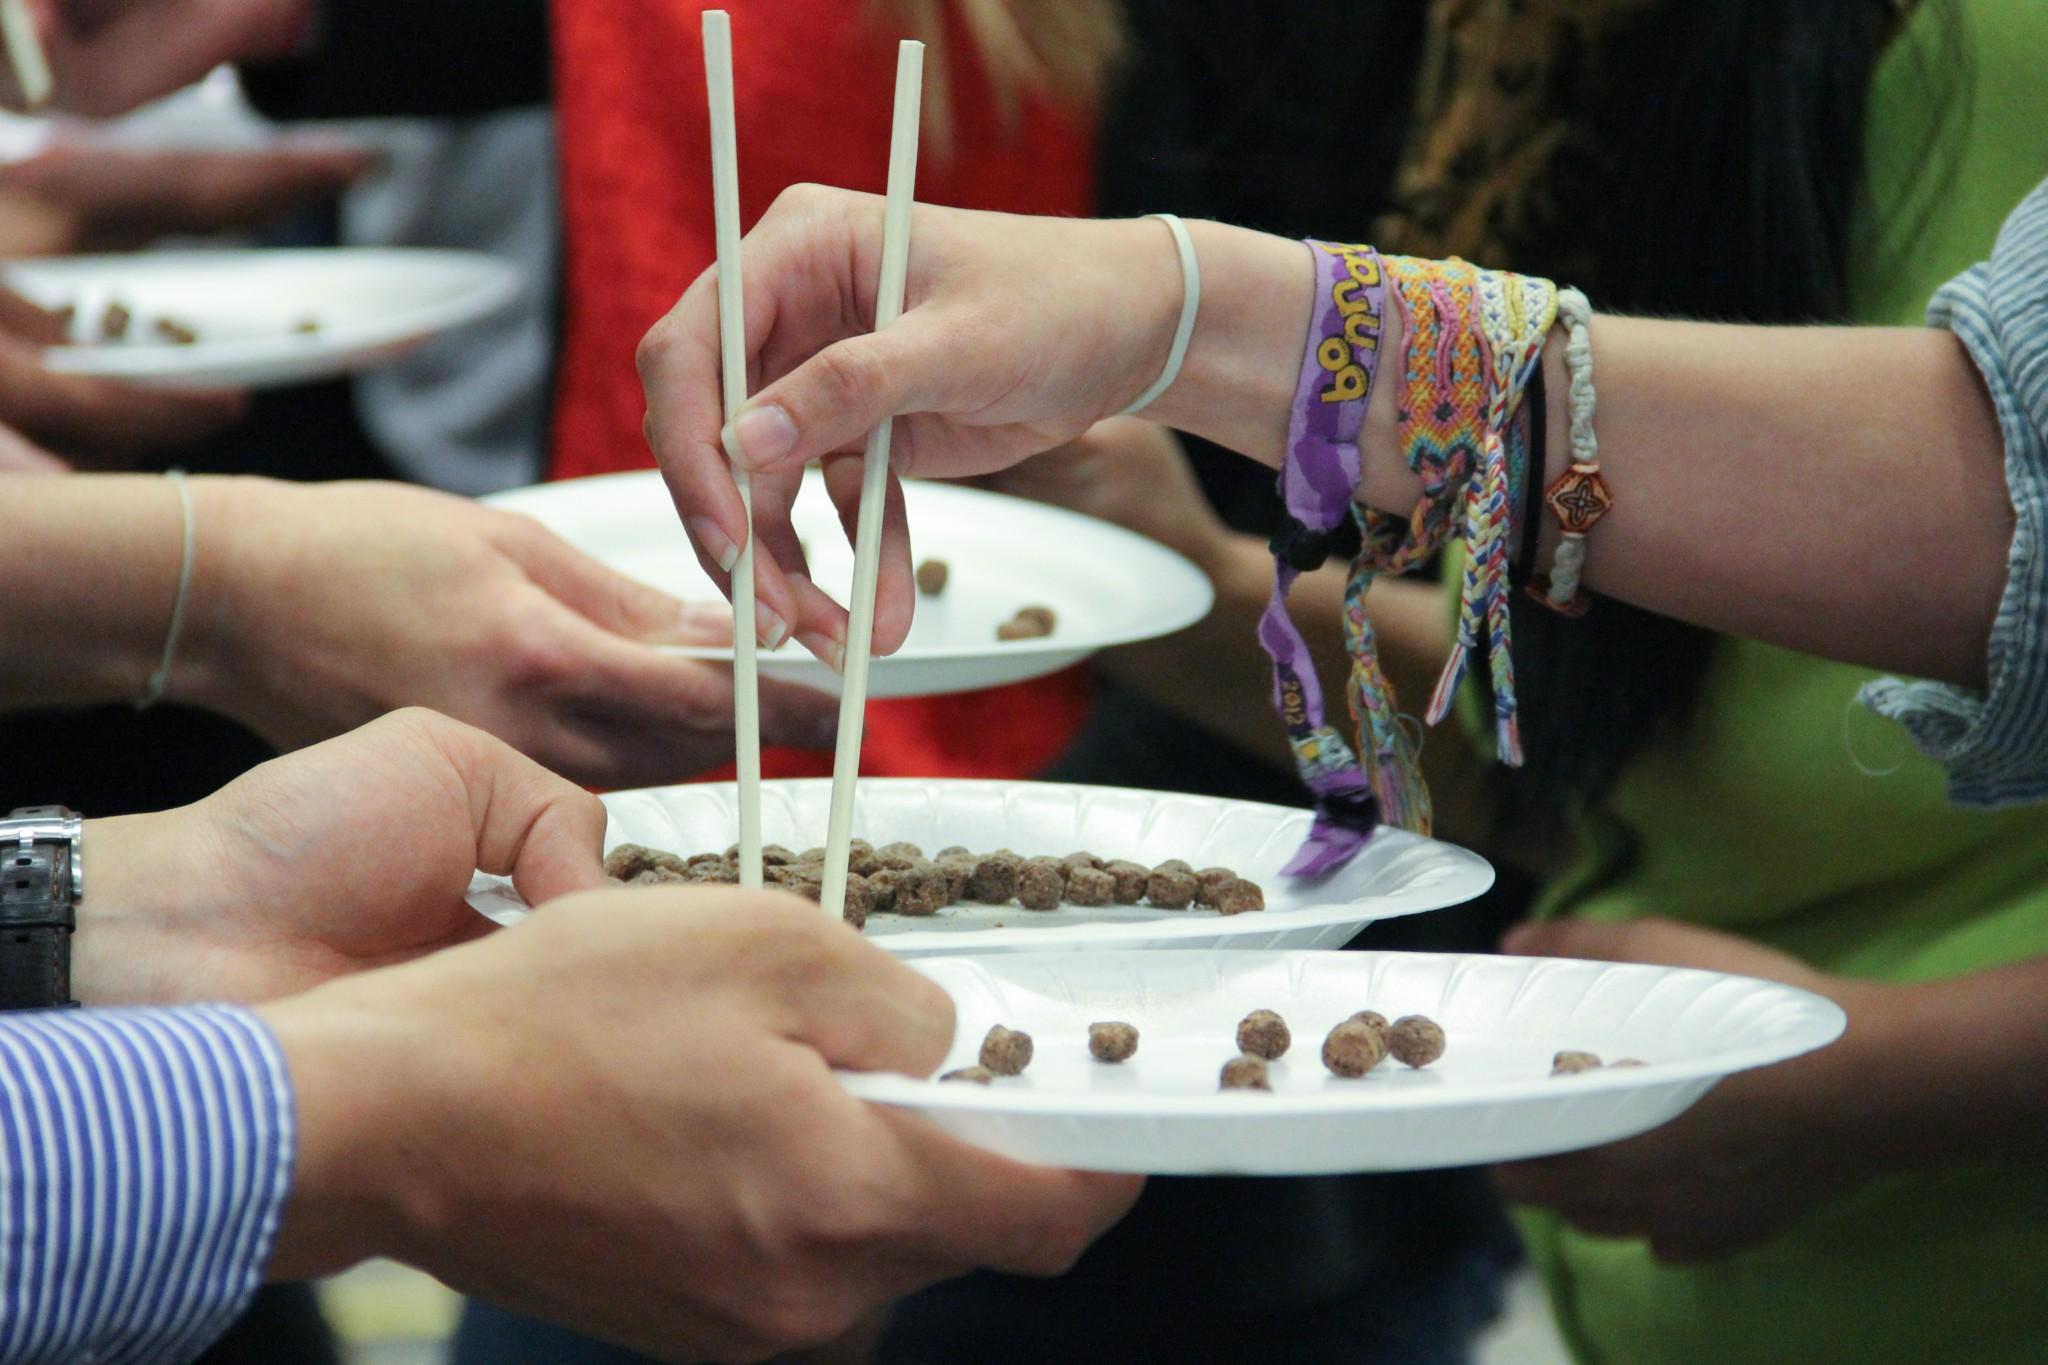 Students experience Asian culture through annual festival